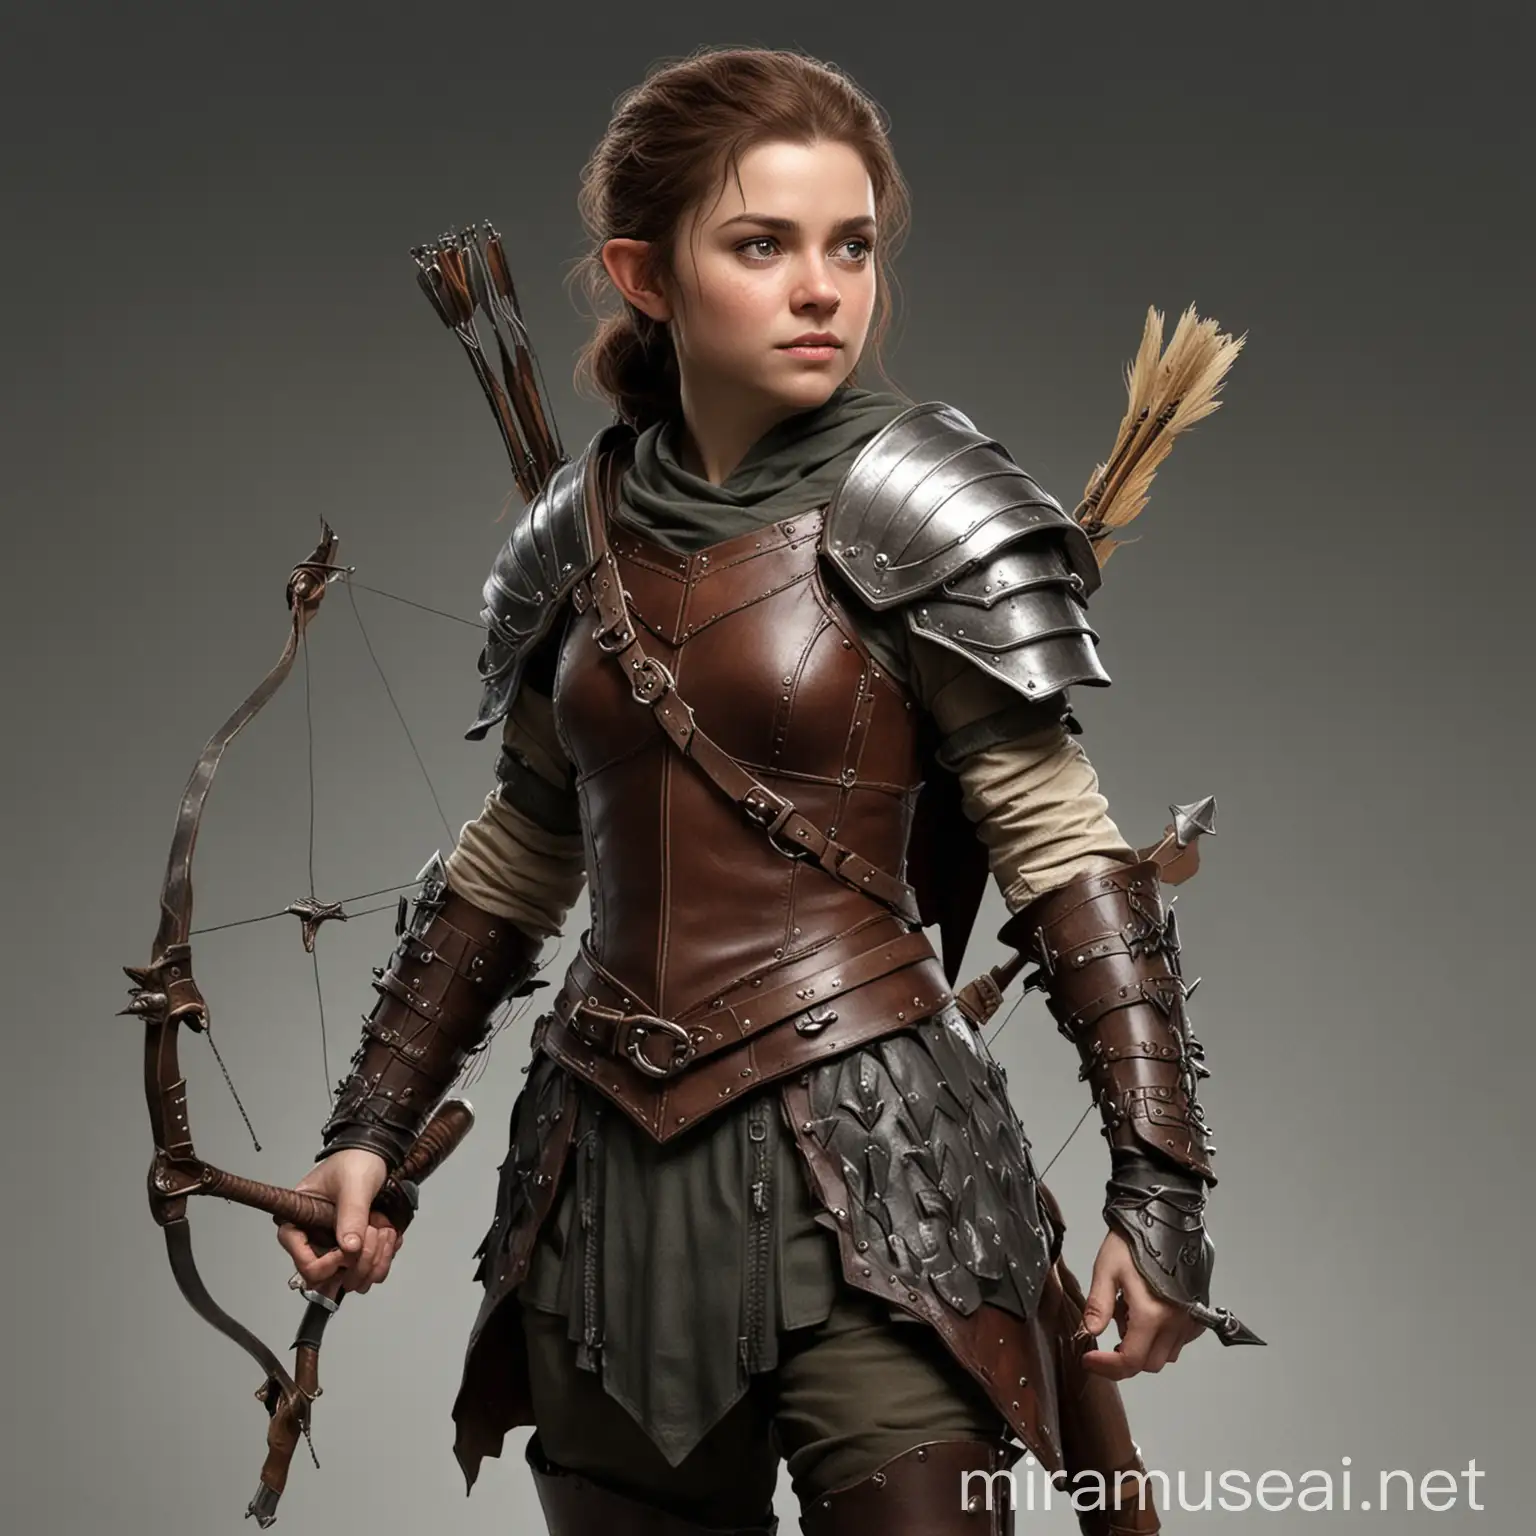 Halfling Archer with Prosthetic Arm in Leather Armor